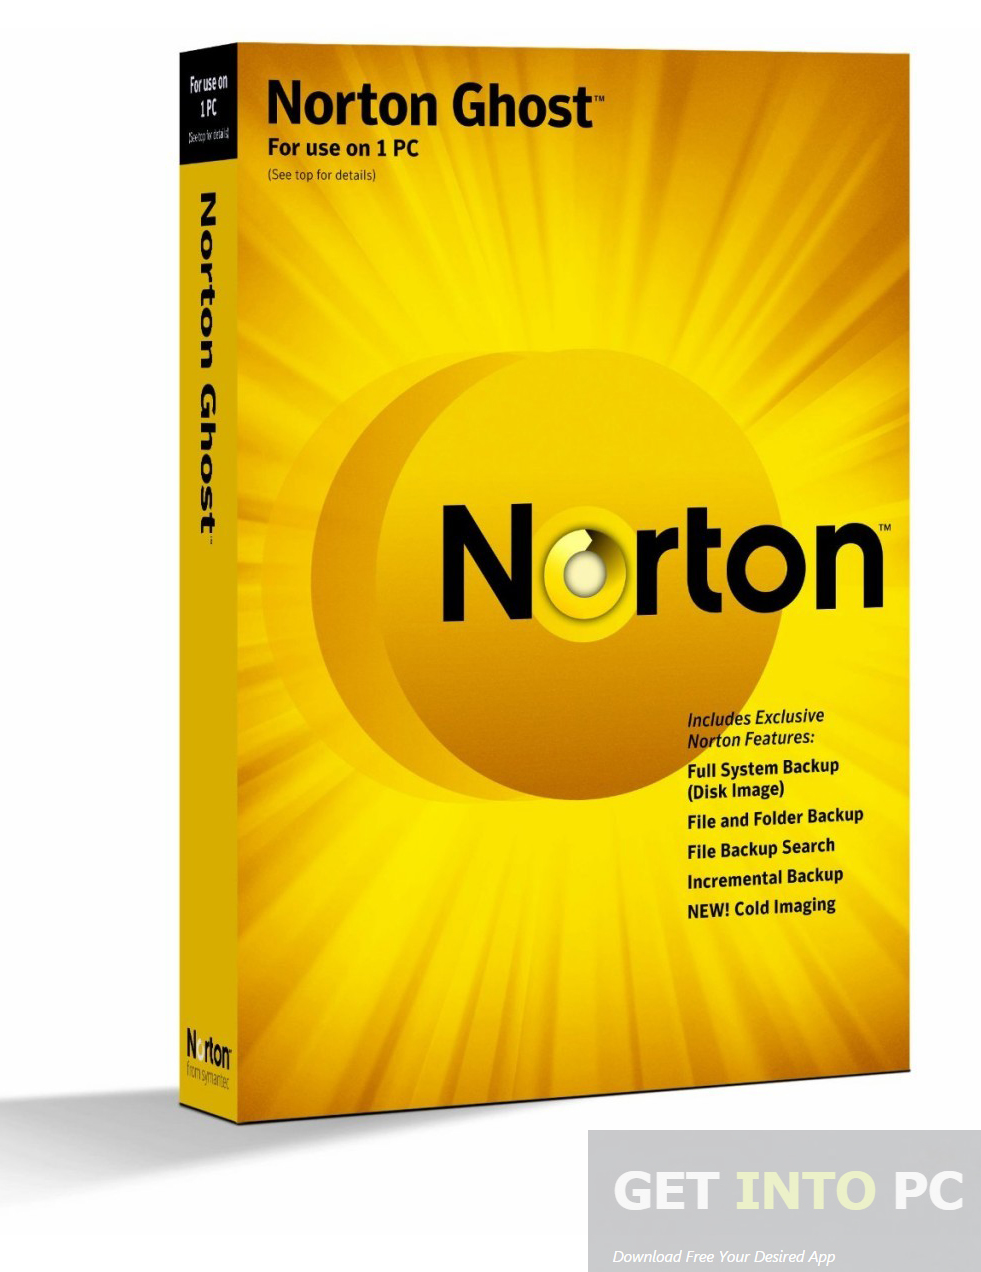 Norton ghost 15 recovery disk download